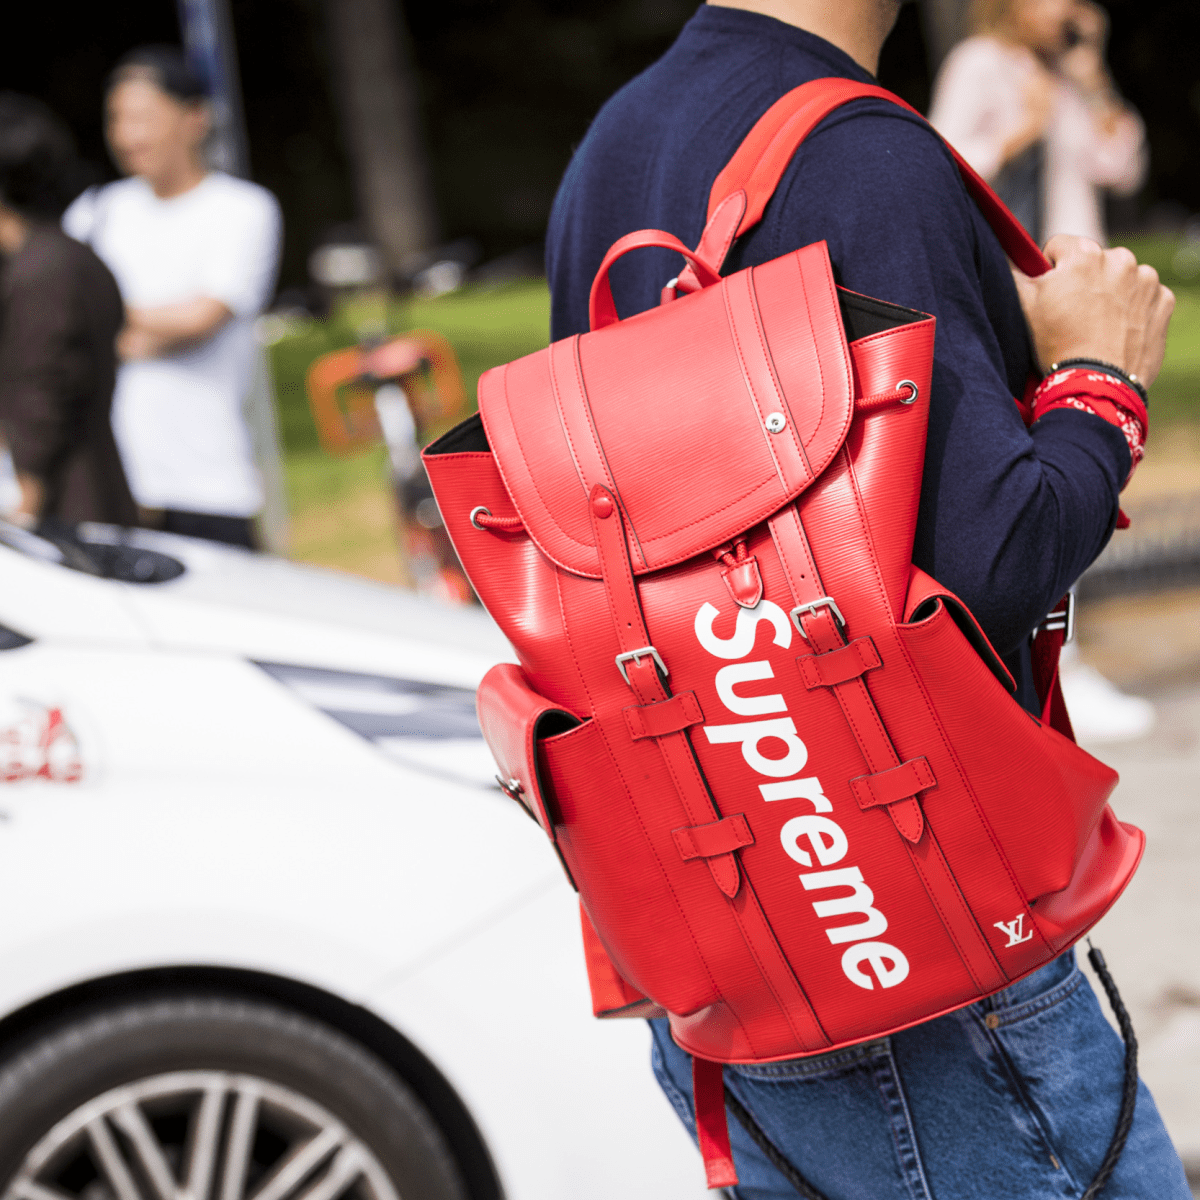 Give a kick to your fashion style with supreme brand clothing by Hidden  Hype - Issuu